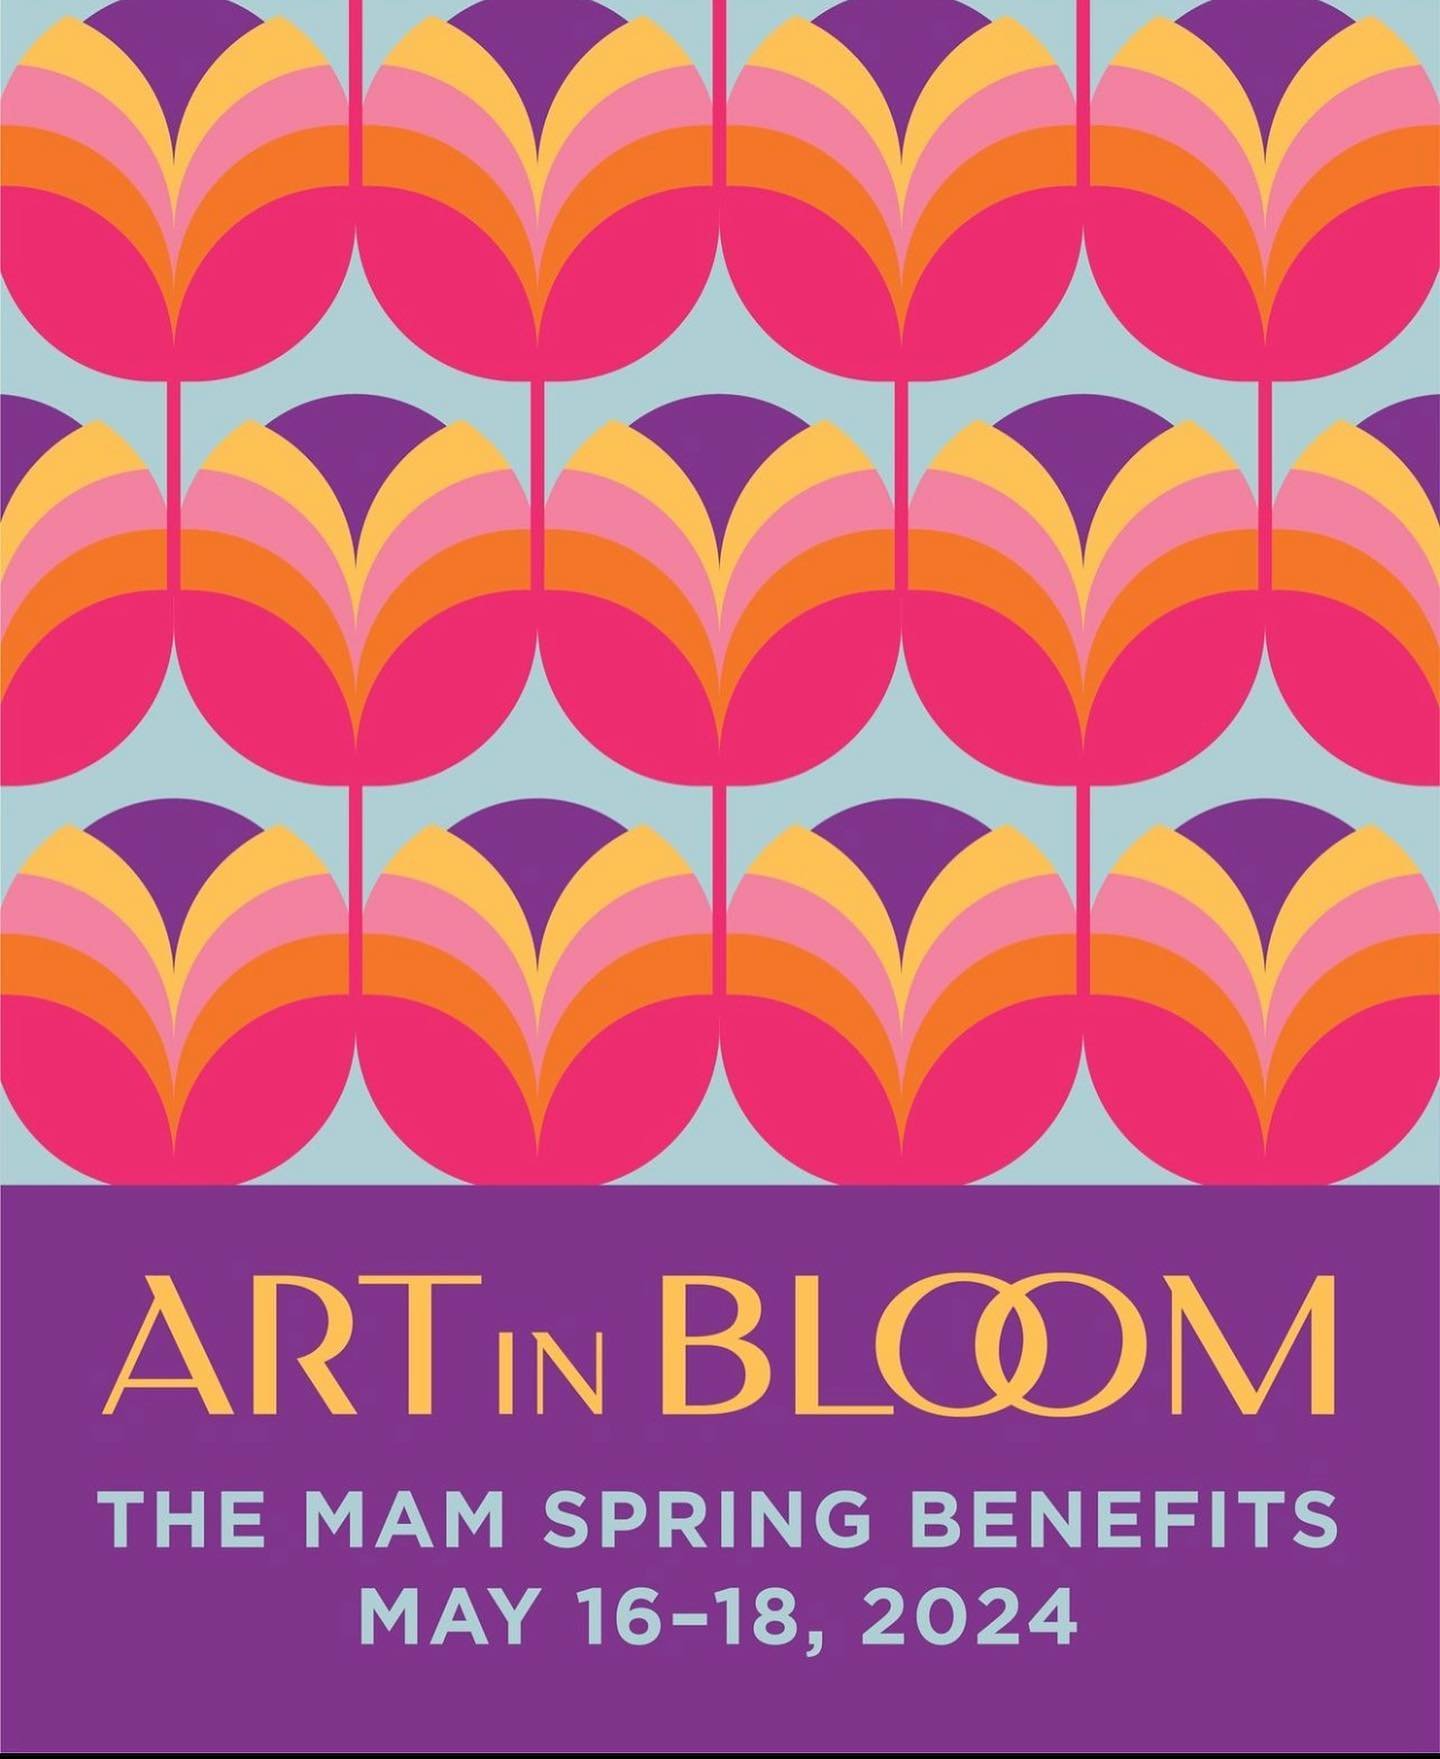 We are excited to interpret a painting by our dear friend @philemona8 at Montclair Art Museum&rsquo;s biennial Art in Bloom event opening May 15th. The museum will be filled with work by many talented floral designers and flower enthusiasts. What bet